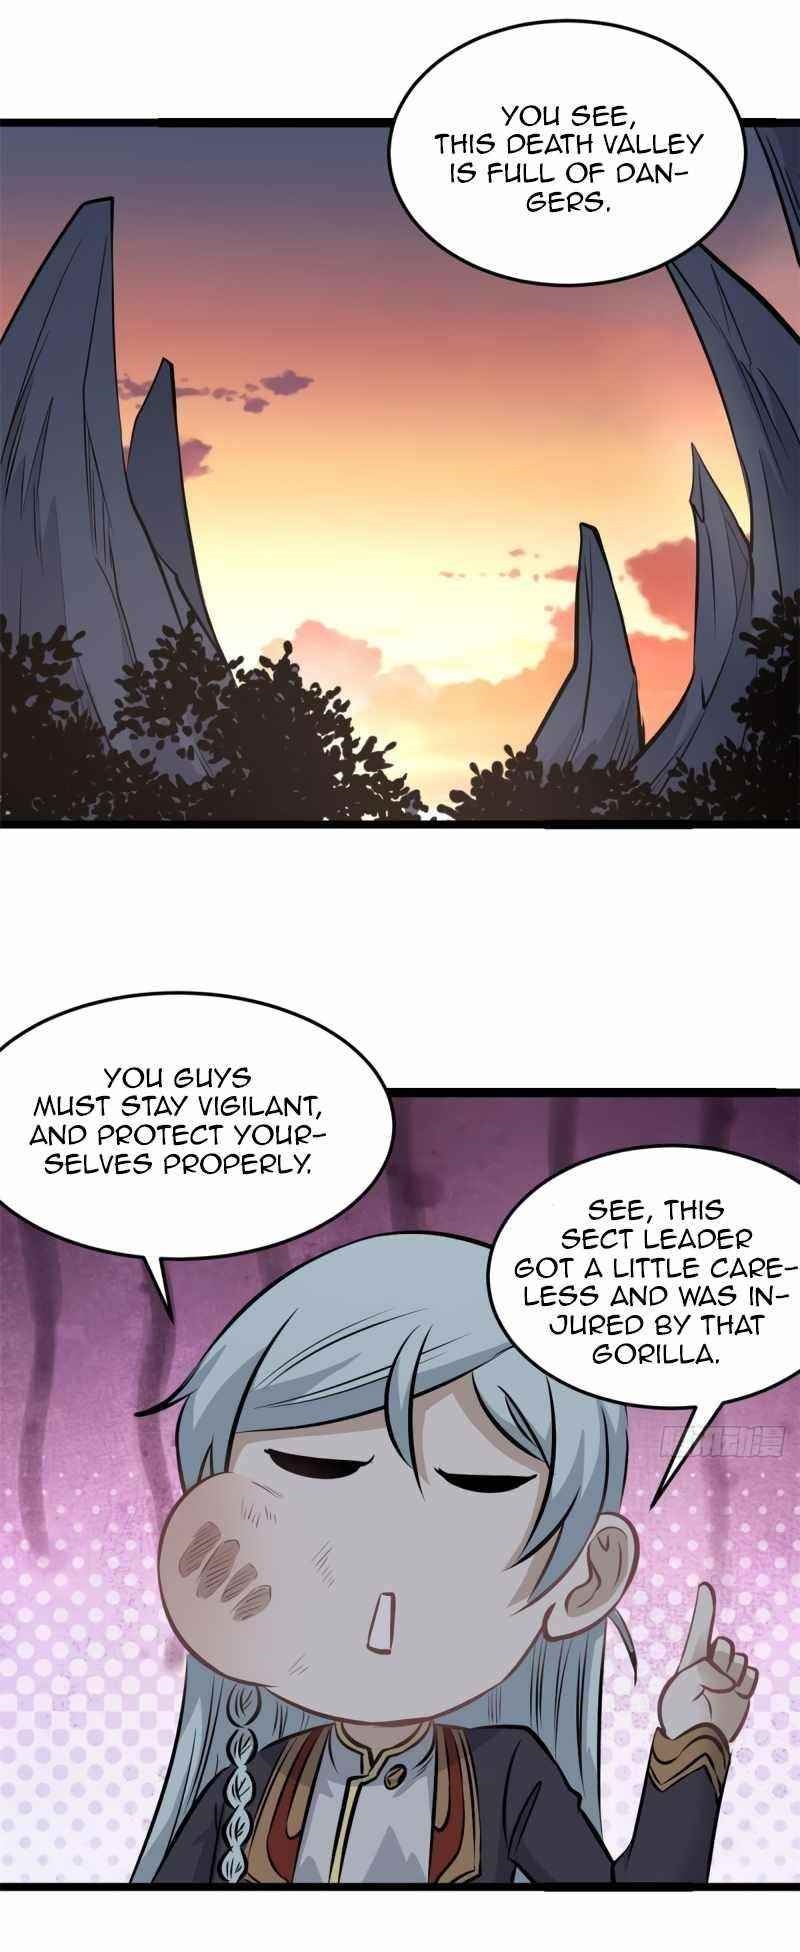 All Hail The Sect Leader Chapter 106 - Page 1